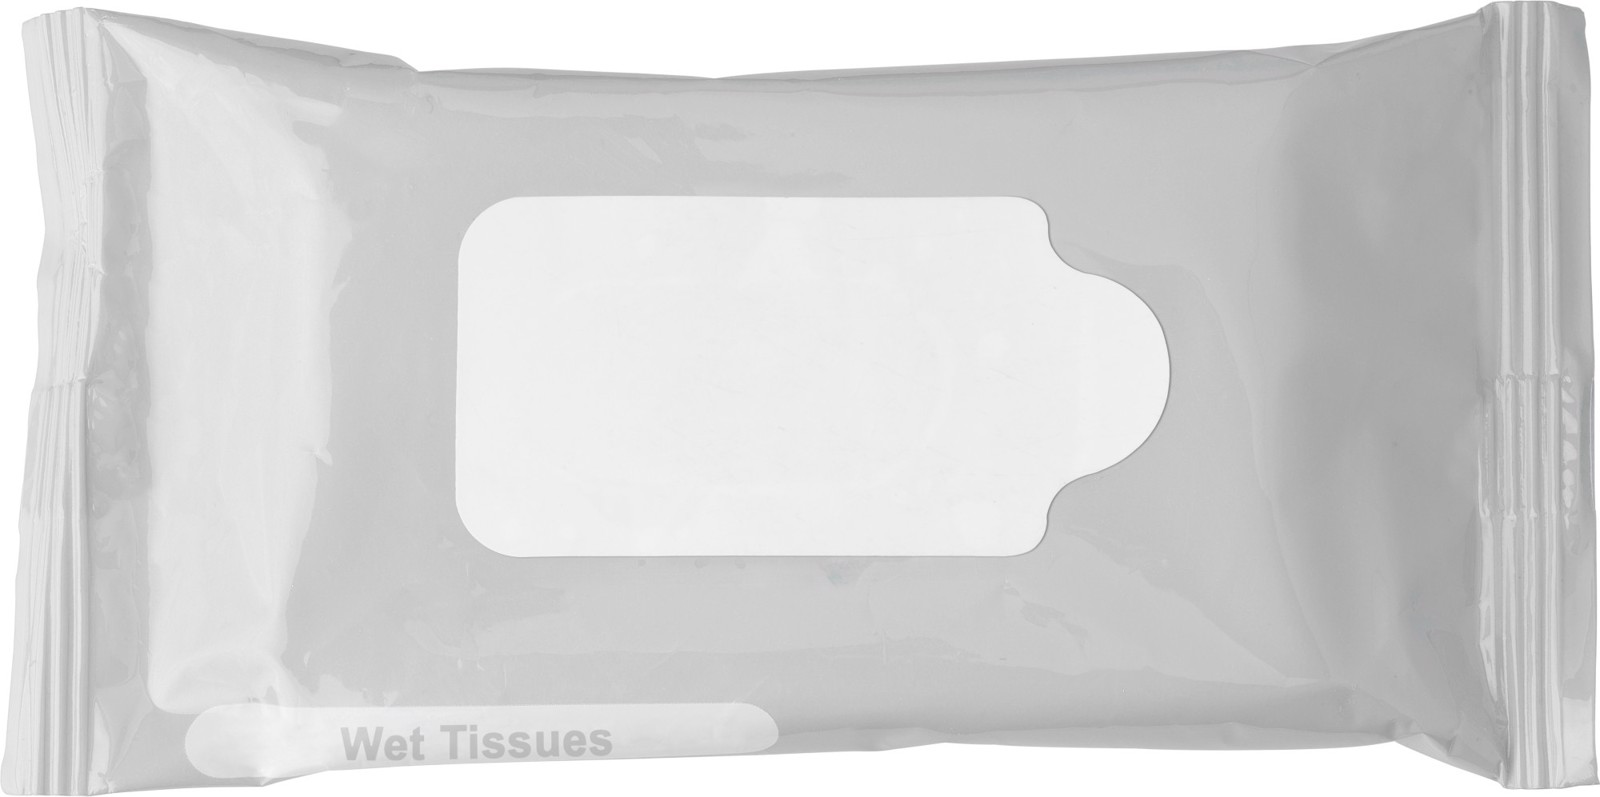 Plastic bag with 10 wet tissues - Silver